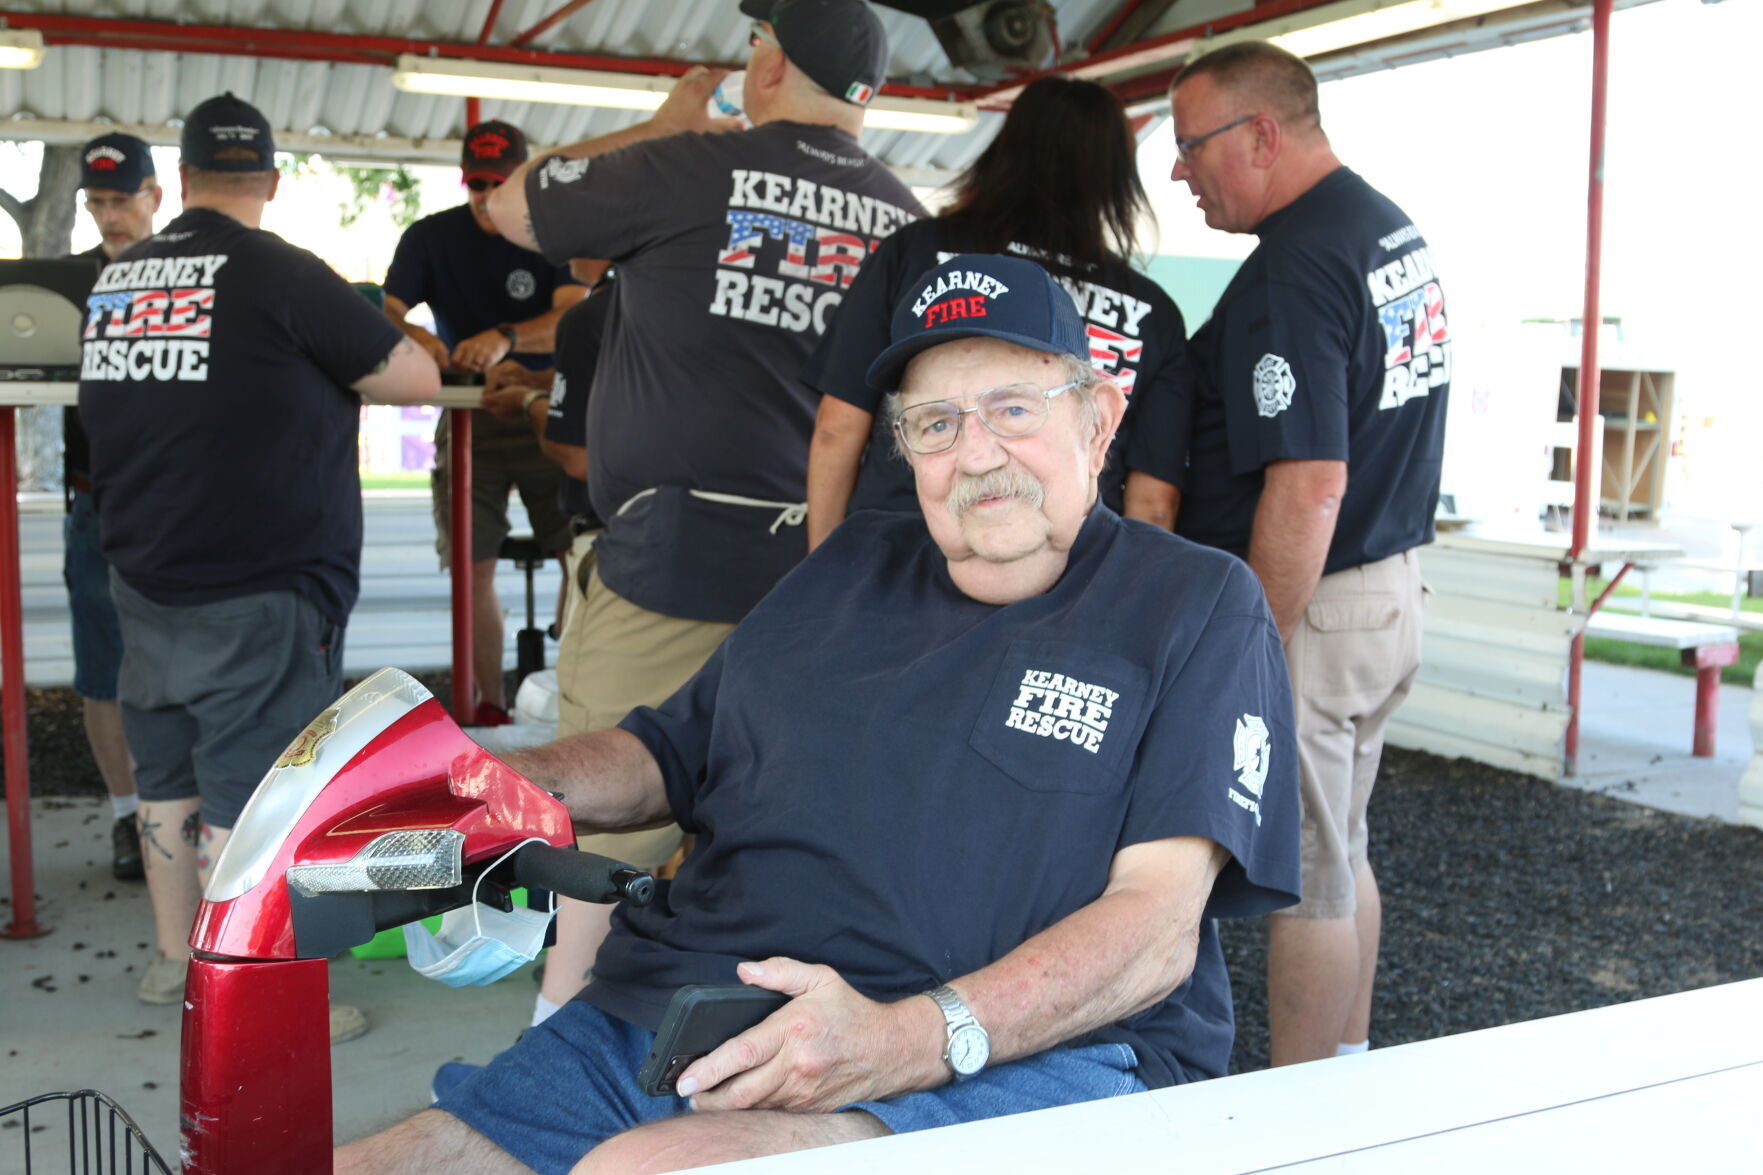 Emmett Maul one of the greats of the Kearney Volunteer Fire Department image pic